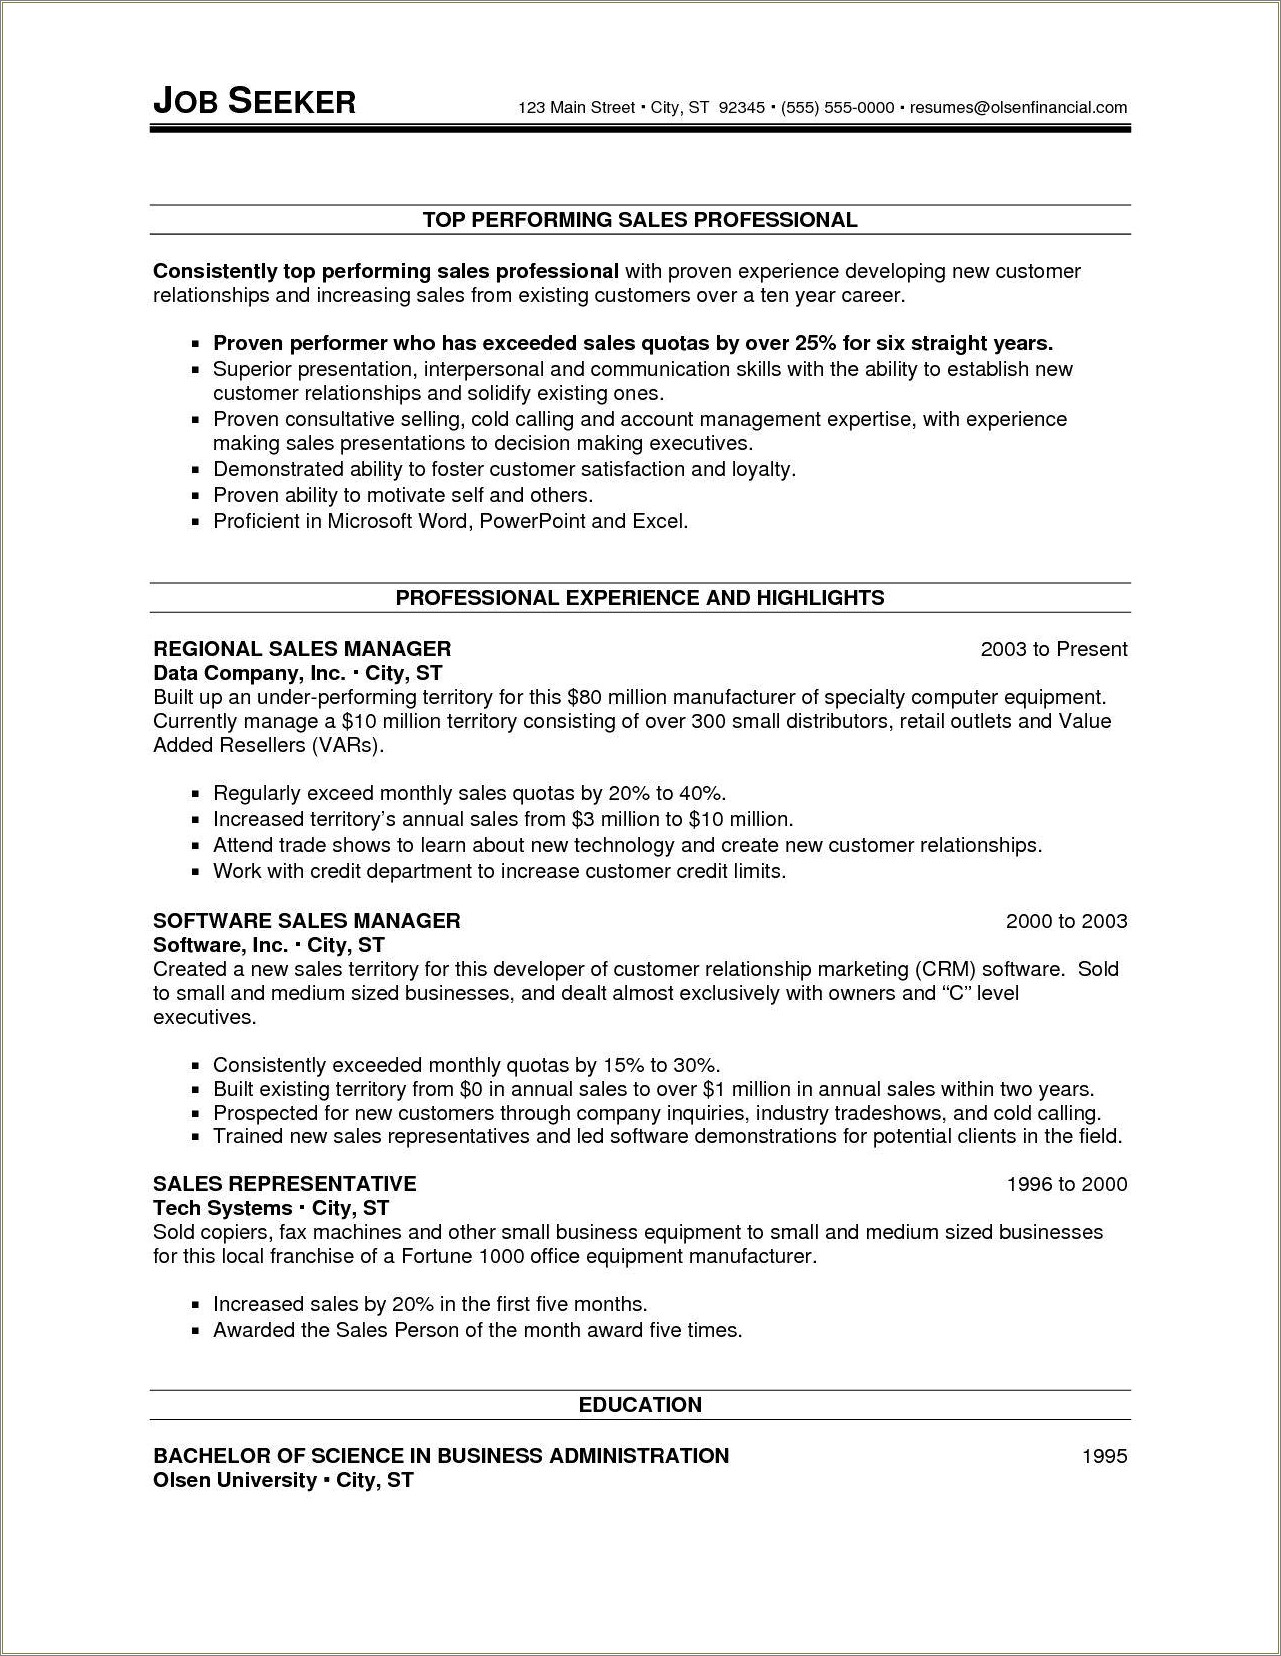 how to write a resume with 20 years experience